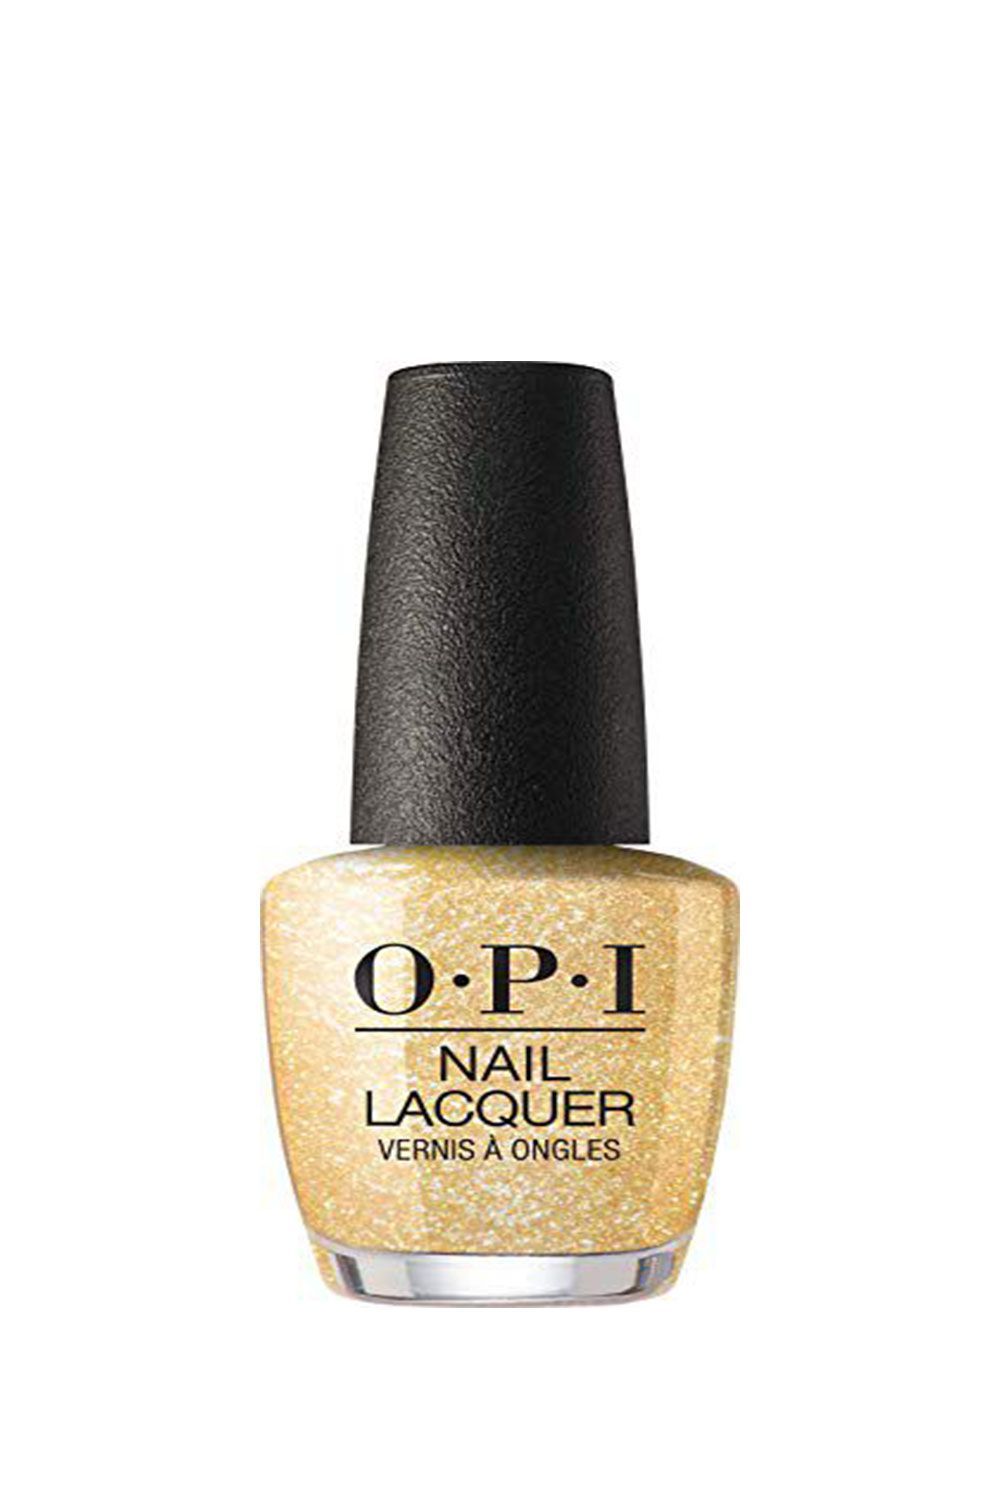 OPI Nail Lacquer in Dazzling Dew  Drop 